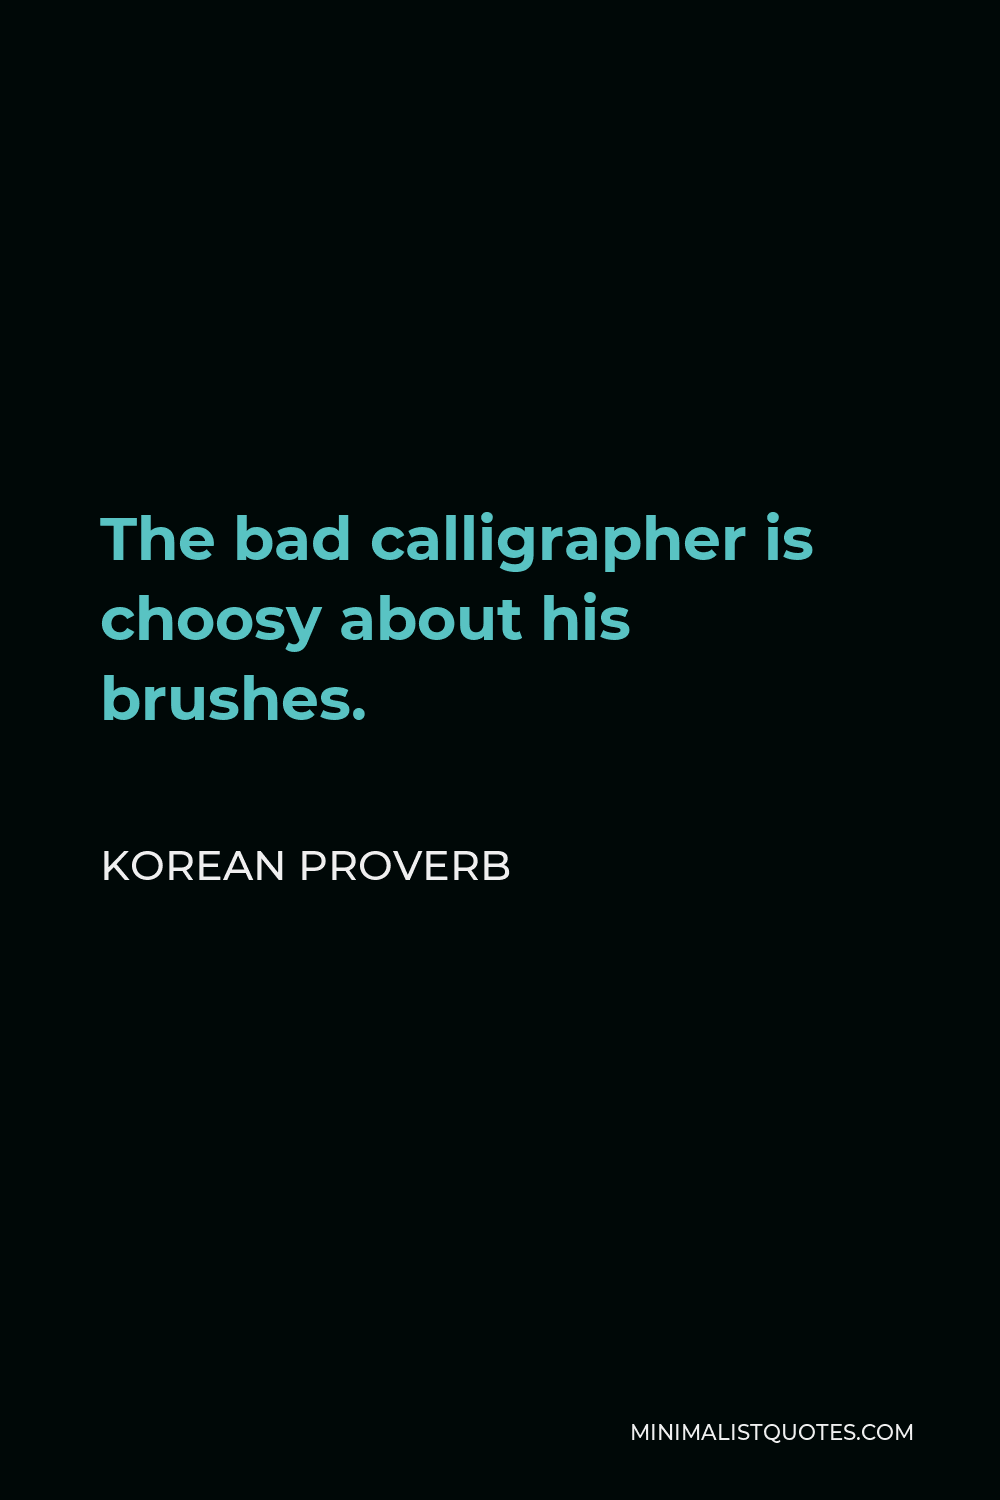 Korean Proverb Quote - The bad calligrapher is choosy about his brushes.